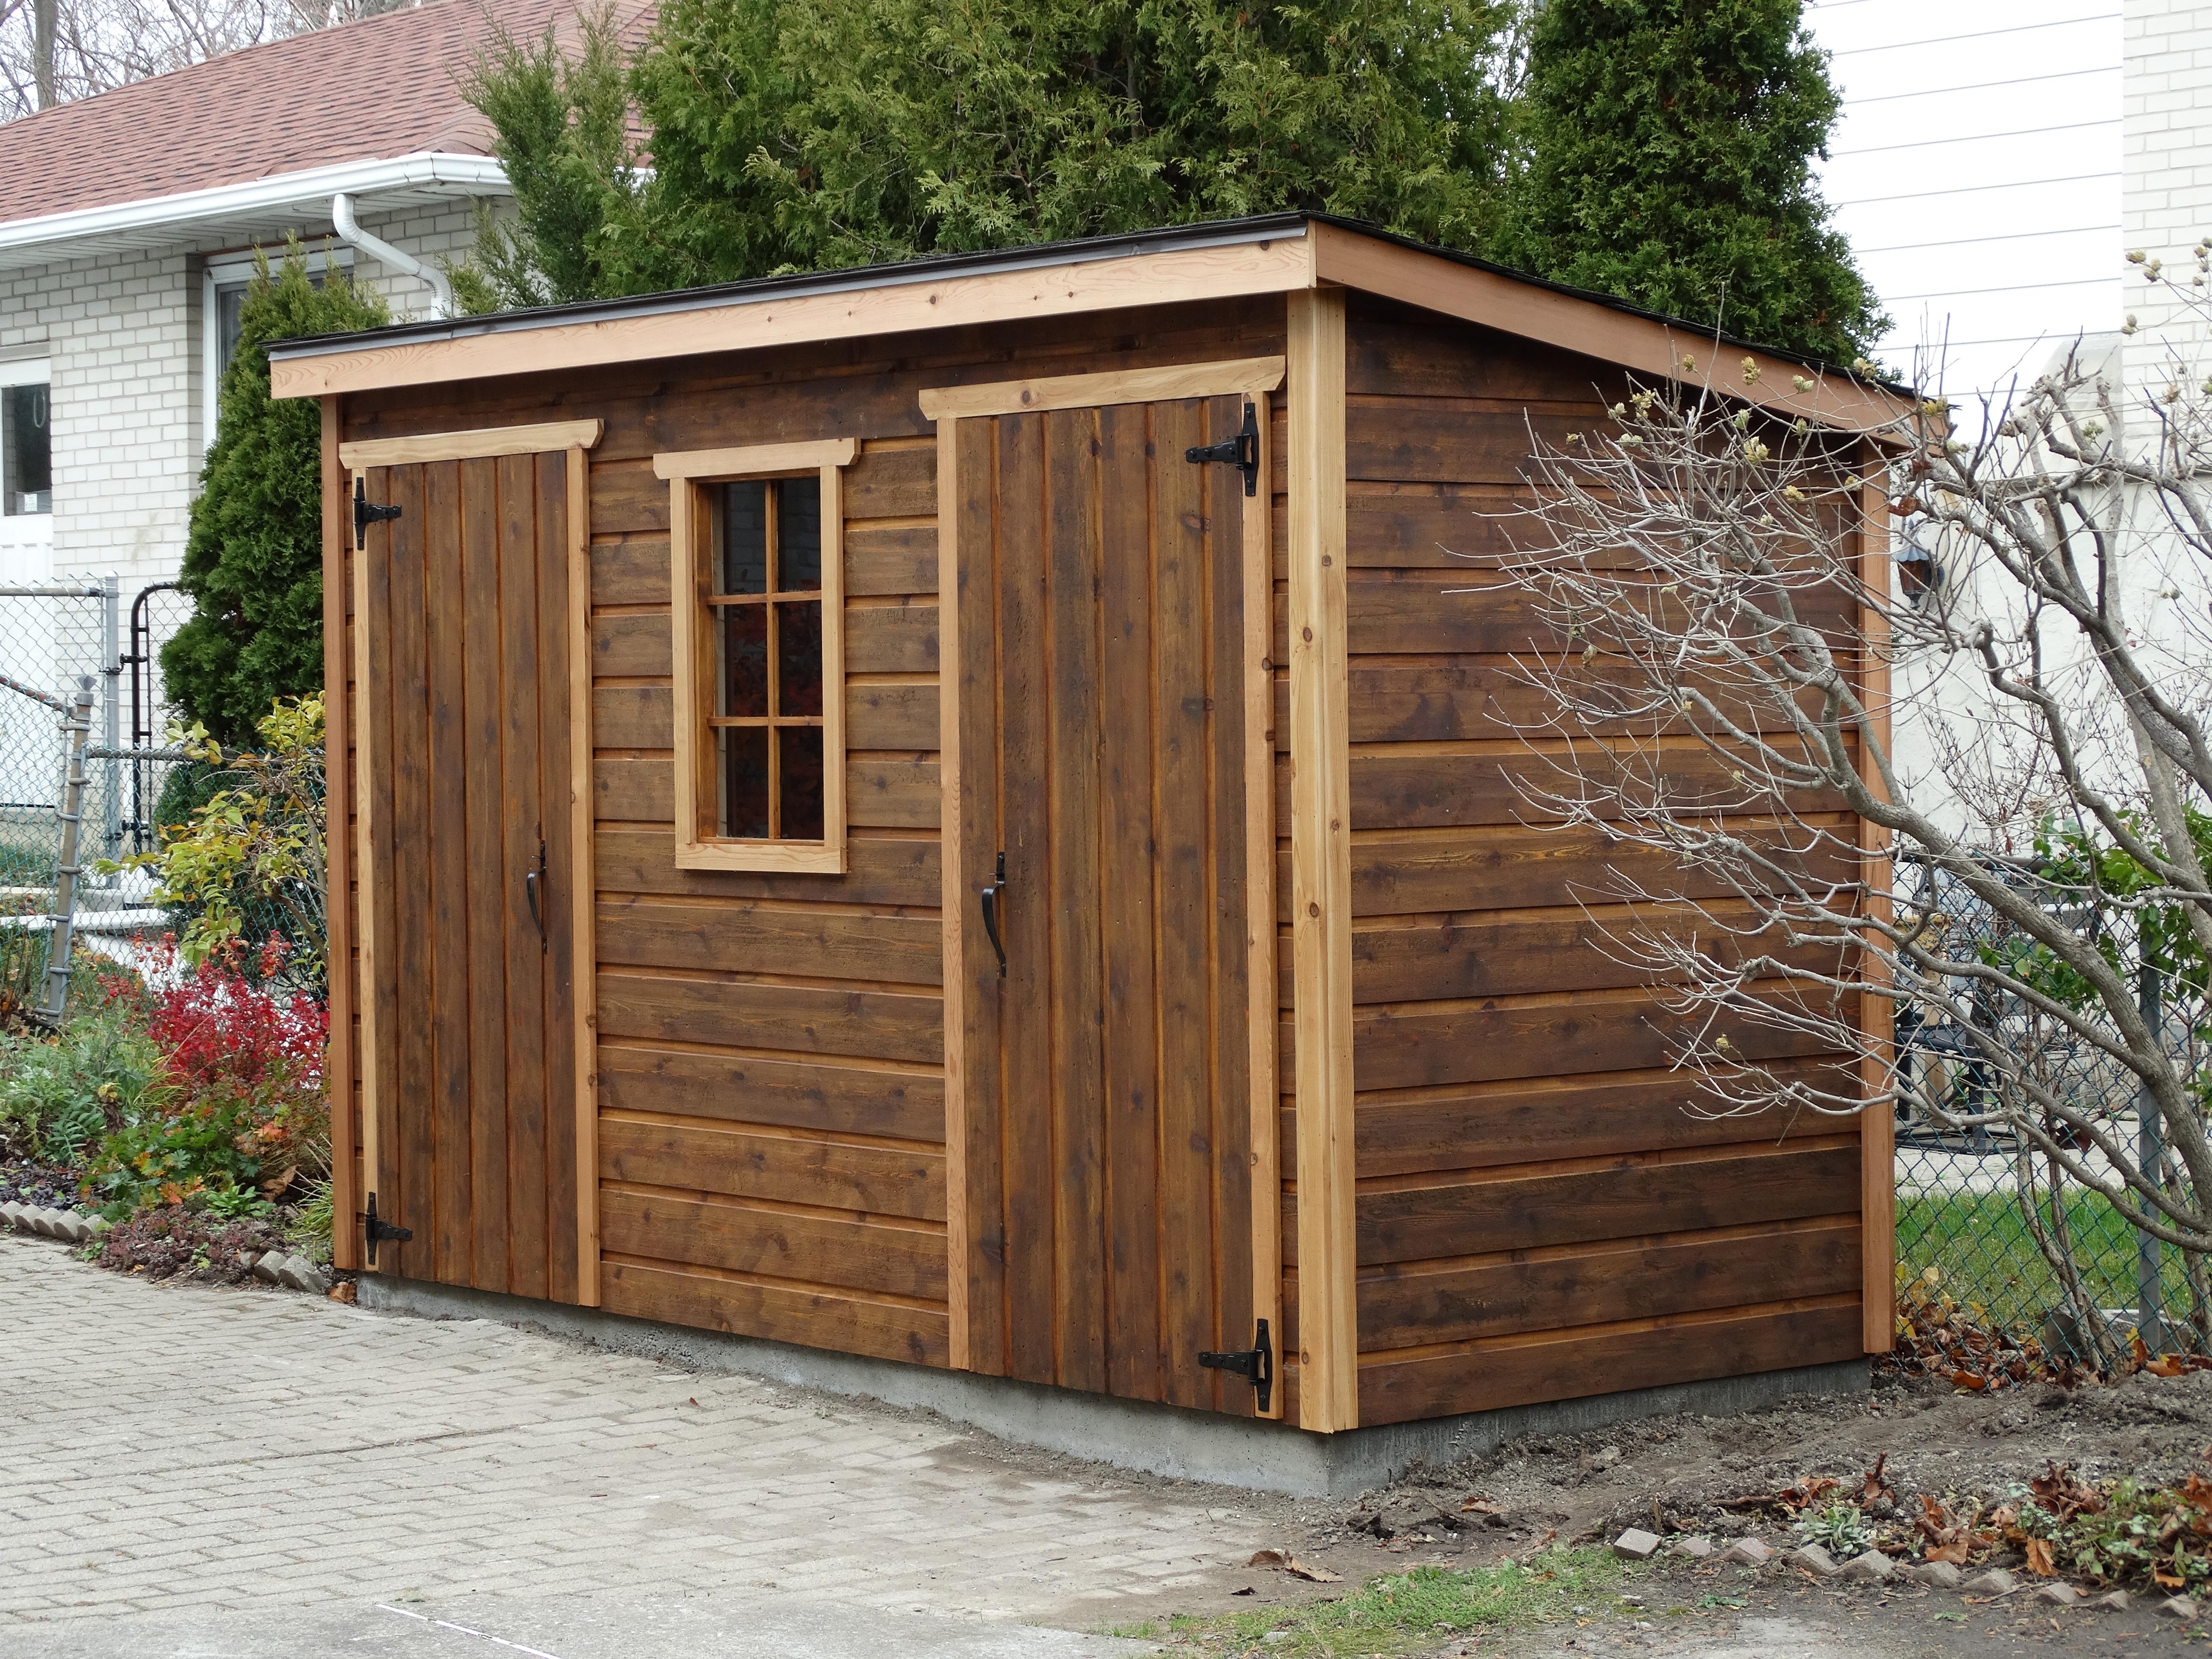 Cedar Sarawak lean to shed 5x12 with fixed window in Toronto, Ontario. ID number 195929-1